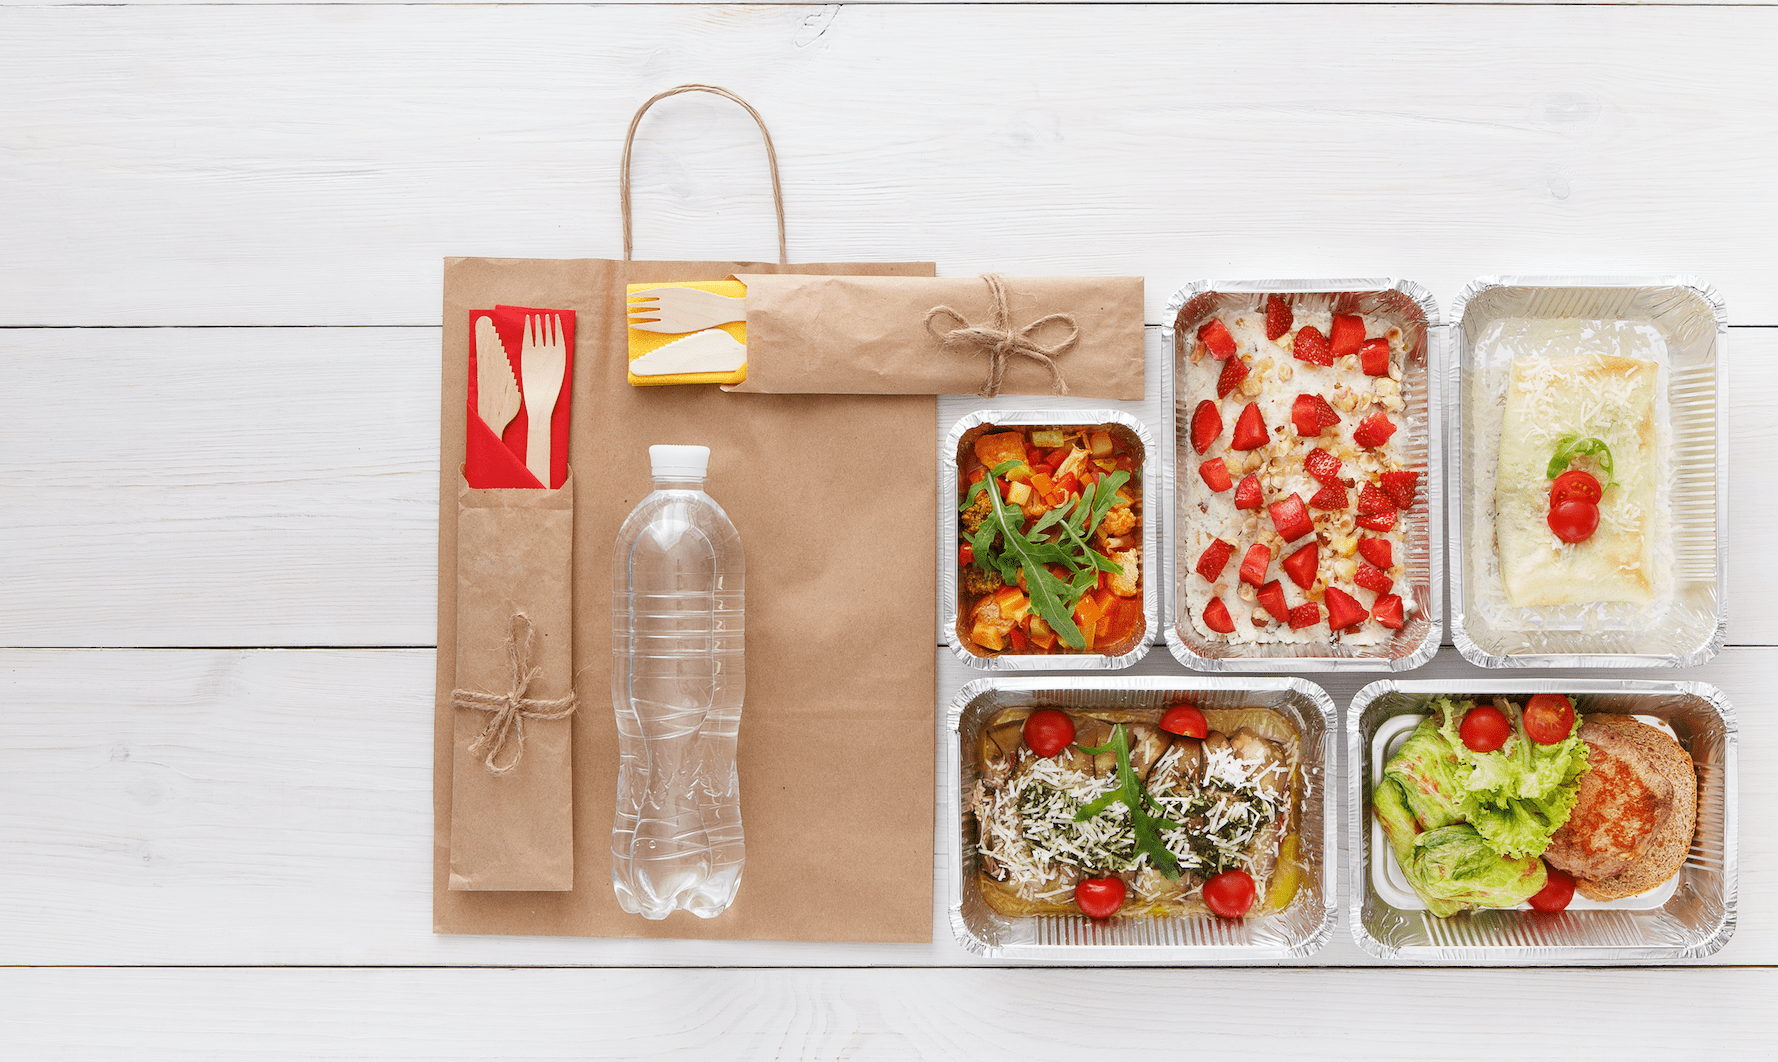 St. Louis’ #1 Meal Prep Delivery Service